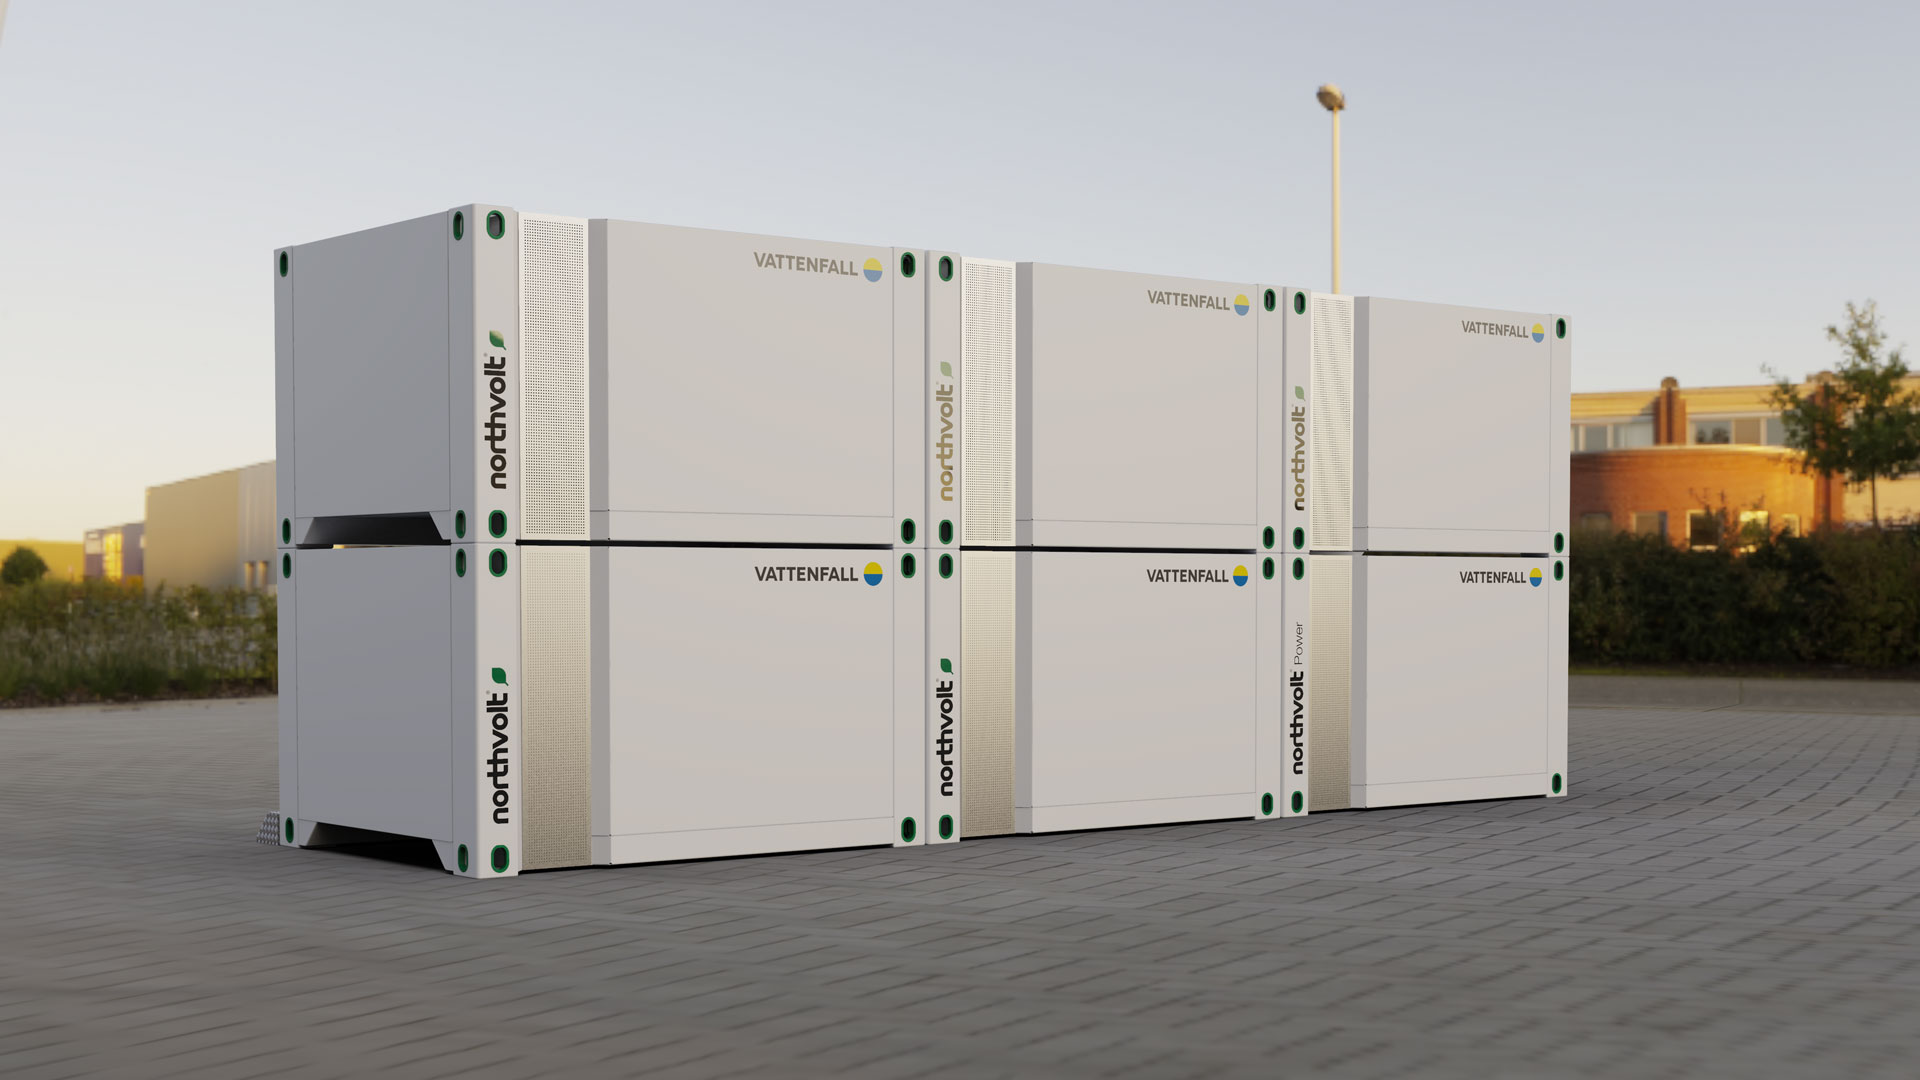 Vattenfall and Northvolt has launched a new battery energy storage solution, Mobile Voltpack